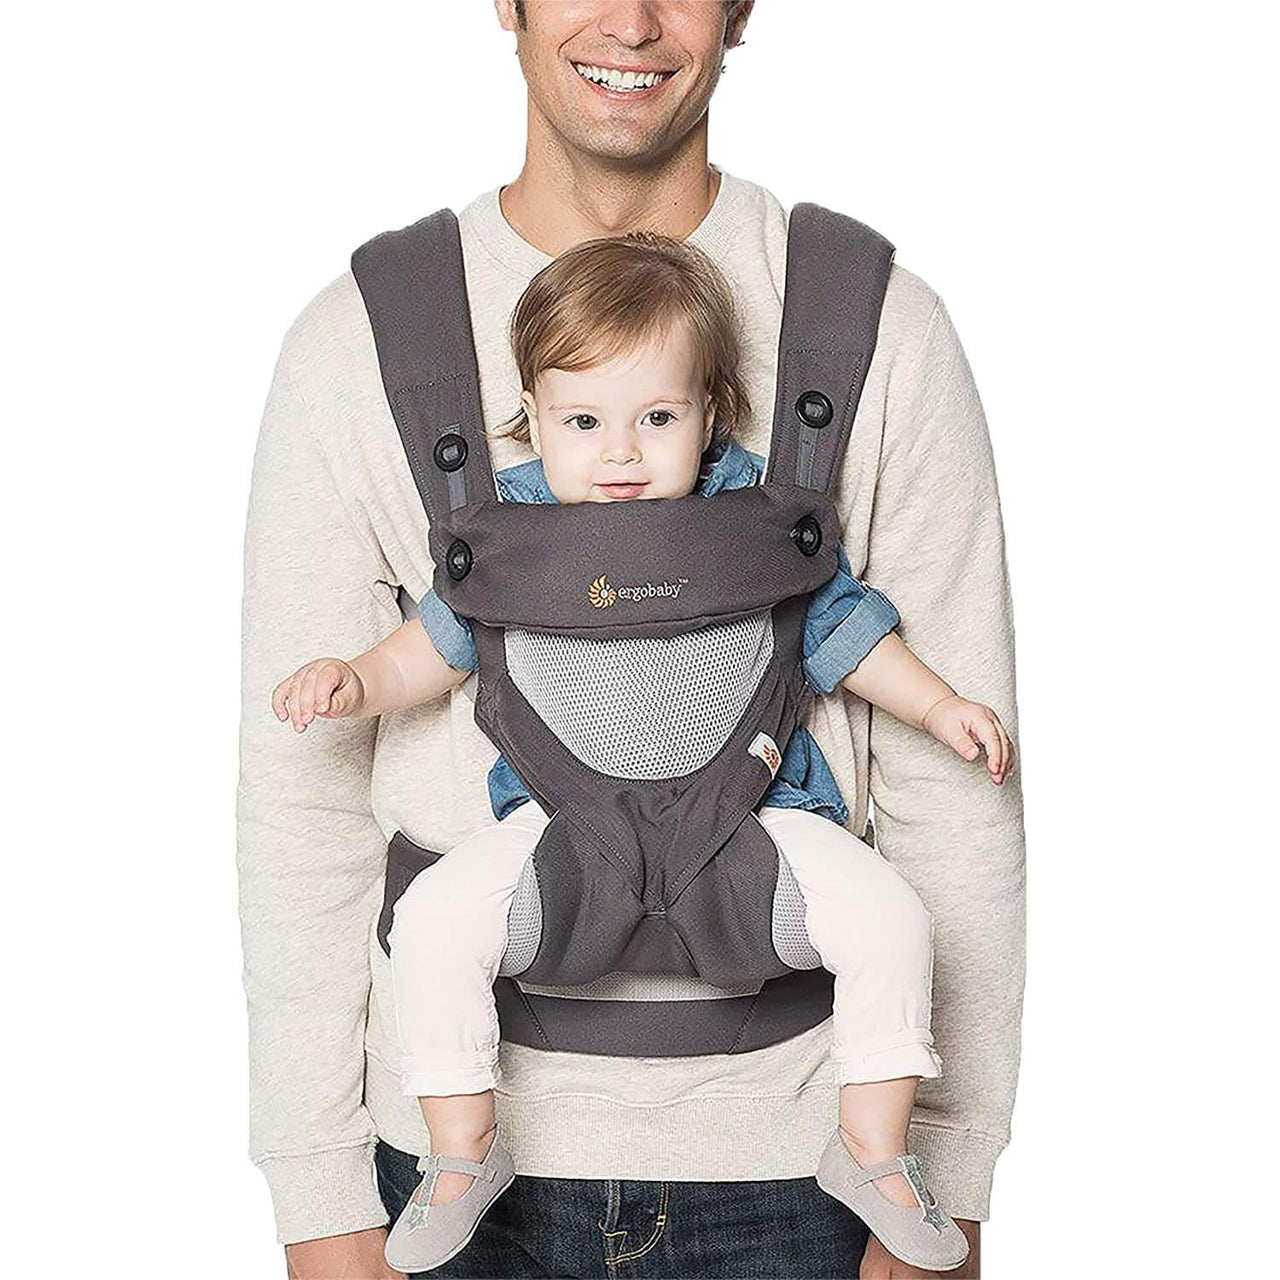 Ergobaby 360 Baby Carrier Backpack - Beetno Store - Baby backpack, Baby backpack carrier, Baby backpack diaper bag, Baby Carrier backpack, BABY ESSENTIALS, best baby backpack carrier, best baby backpack for travel, Best Baby Carrier, child Carrier backpack, ergo 360, ergo 360 carrier, ergobaby, ergobaby 360, ergobaby back carry, ergobaby carriers, front carrier, MUST HAVES, Tolder backpack carrier, Tolder carrier